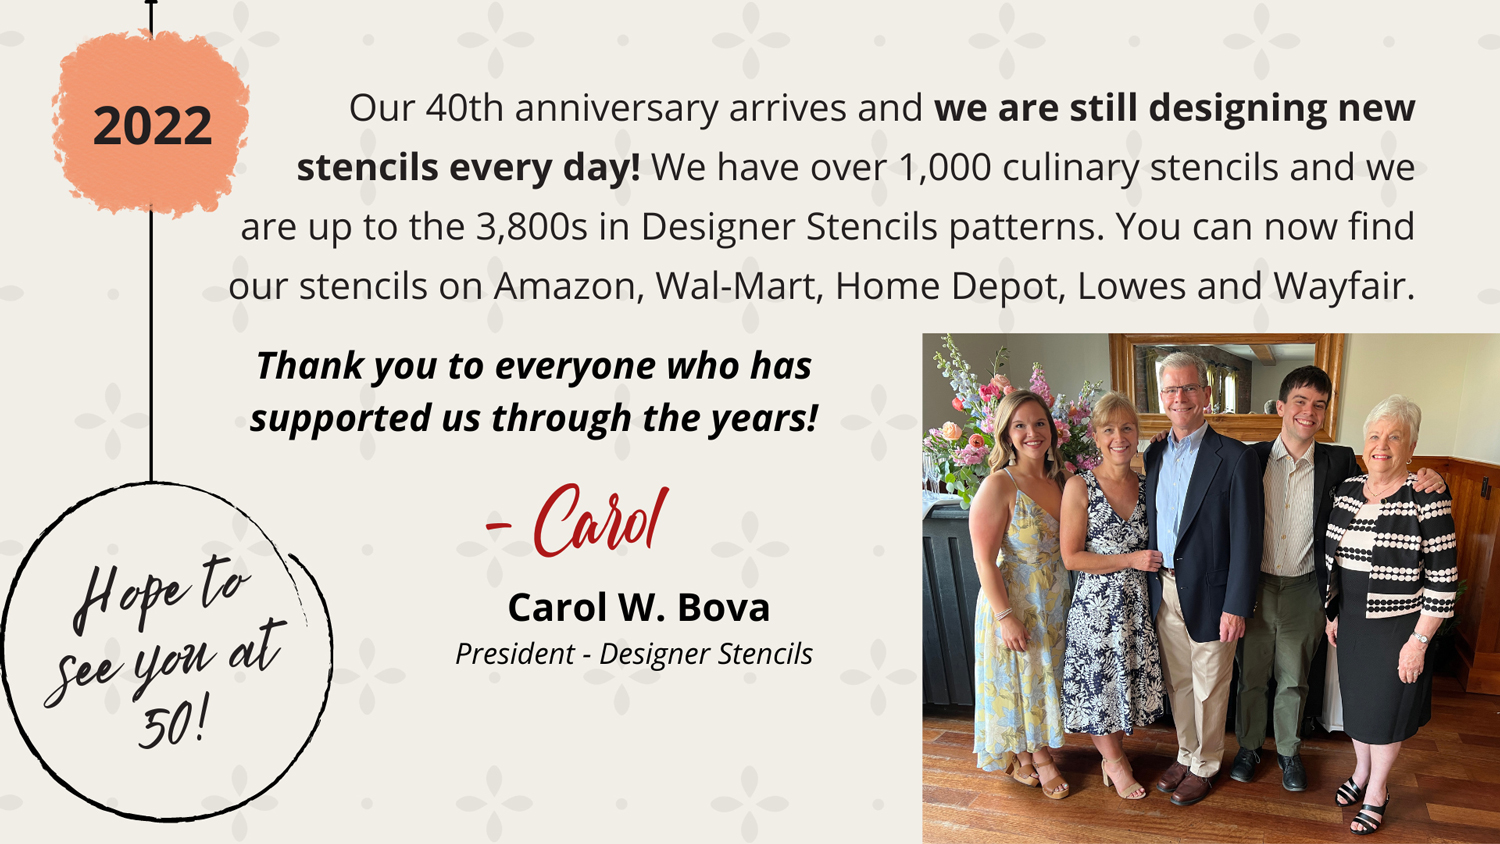 2022 - Our 40th anniversary arrives and we are still designing new stencils every day! We have over 1,000 culinary stencils and we are up to the 3,800s in Designer Stencils patterns. You can now find our stencils on Amazon, Wal-Mart, Home Depot, Lowes and Wayfair. Thank you to everyone who has supported us through the years! Hope to see you at 50!